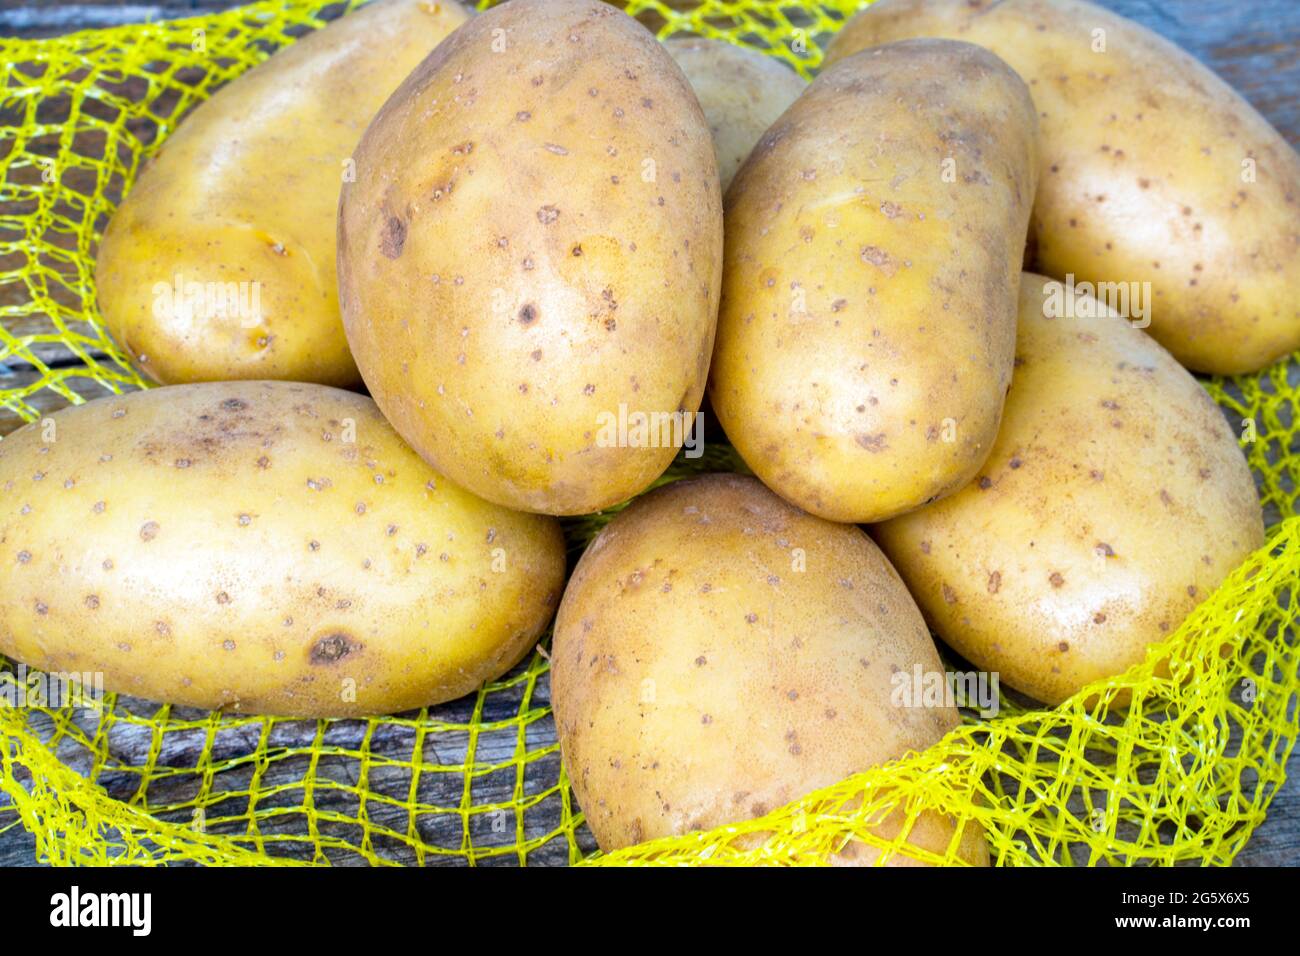 Heap of raw potatos in yellow string bag, on wooden background. Close-up. Studio photography. Stock Photo